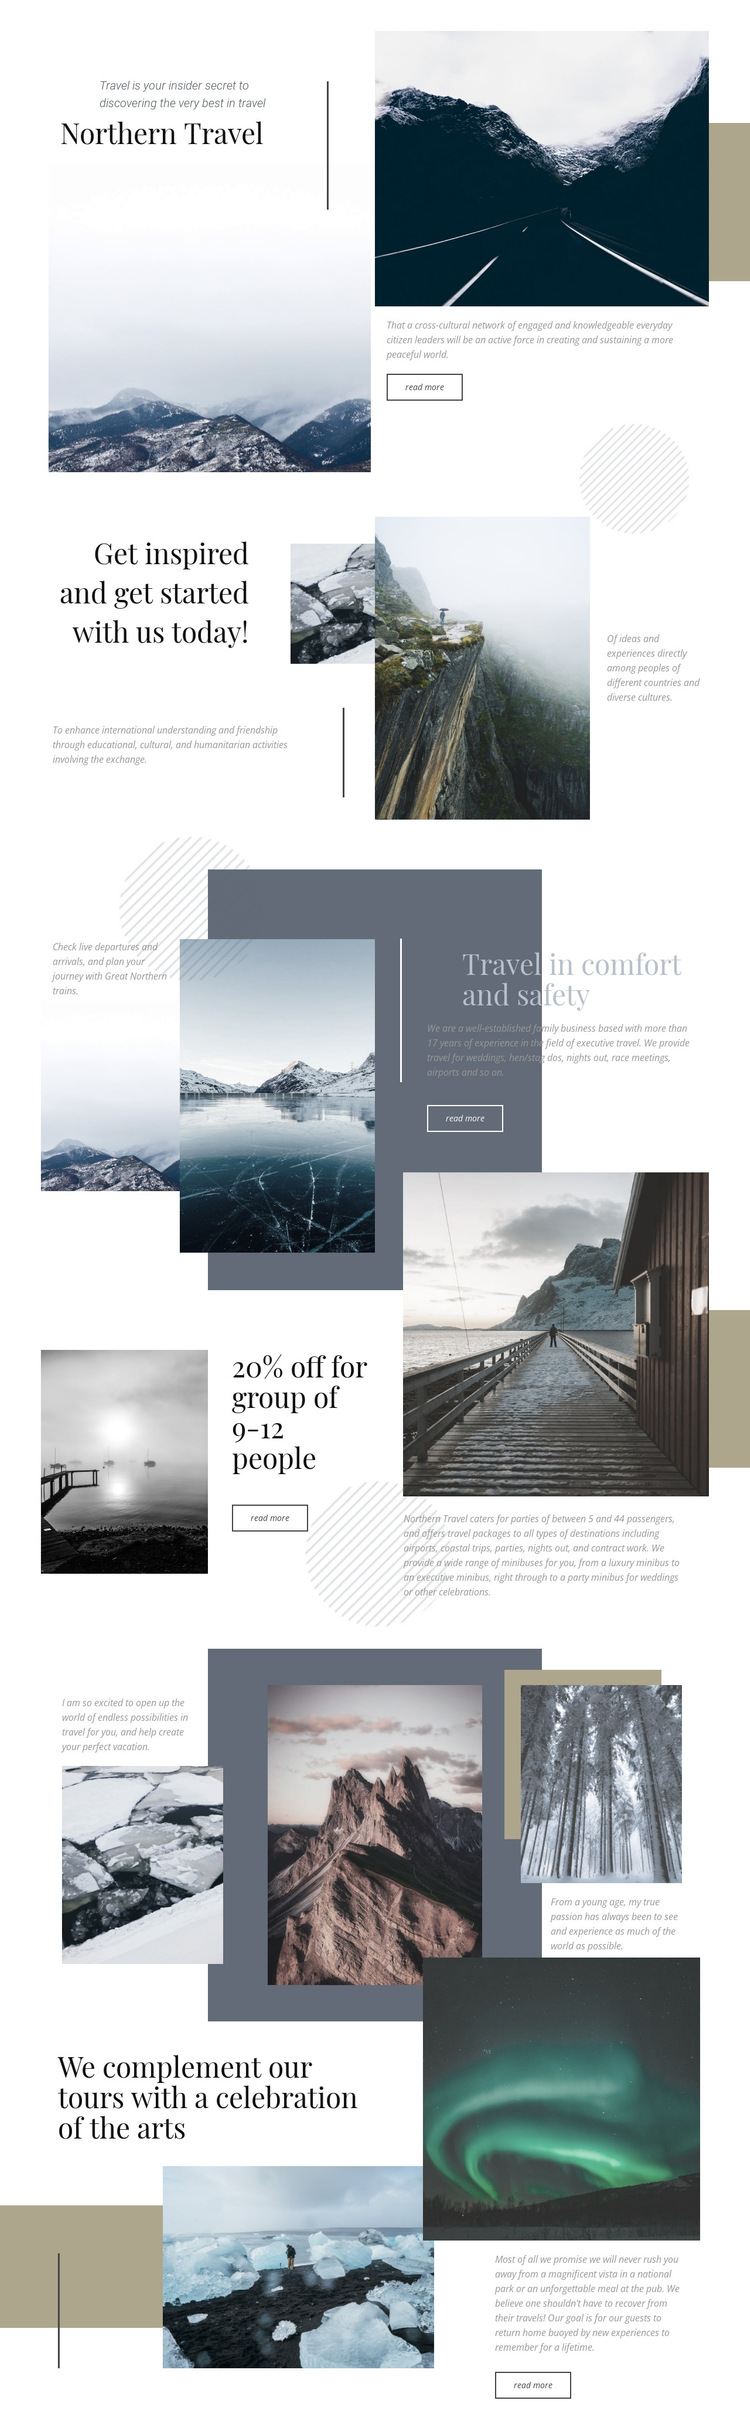 Northern Travel HTML5 Template